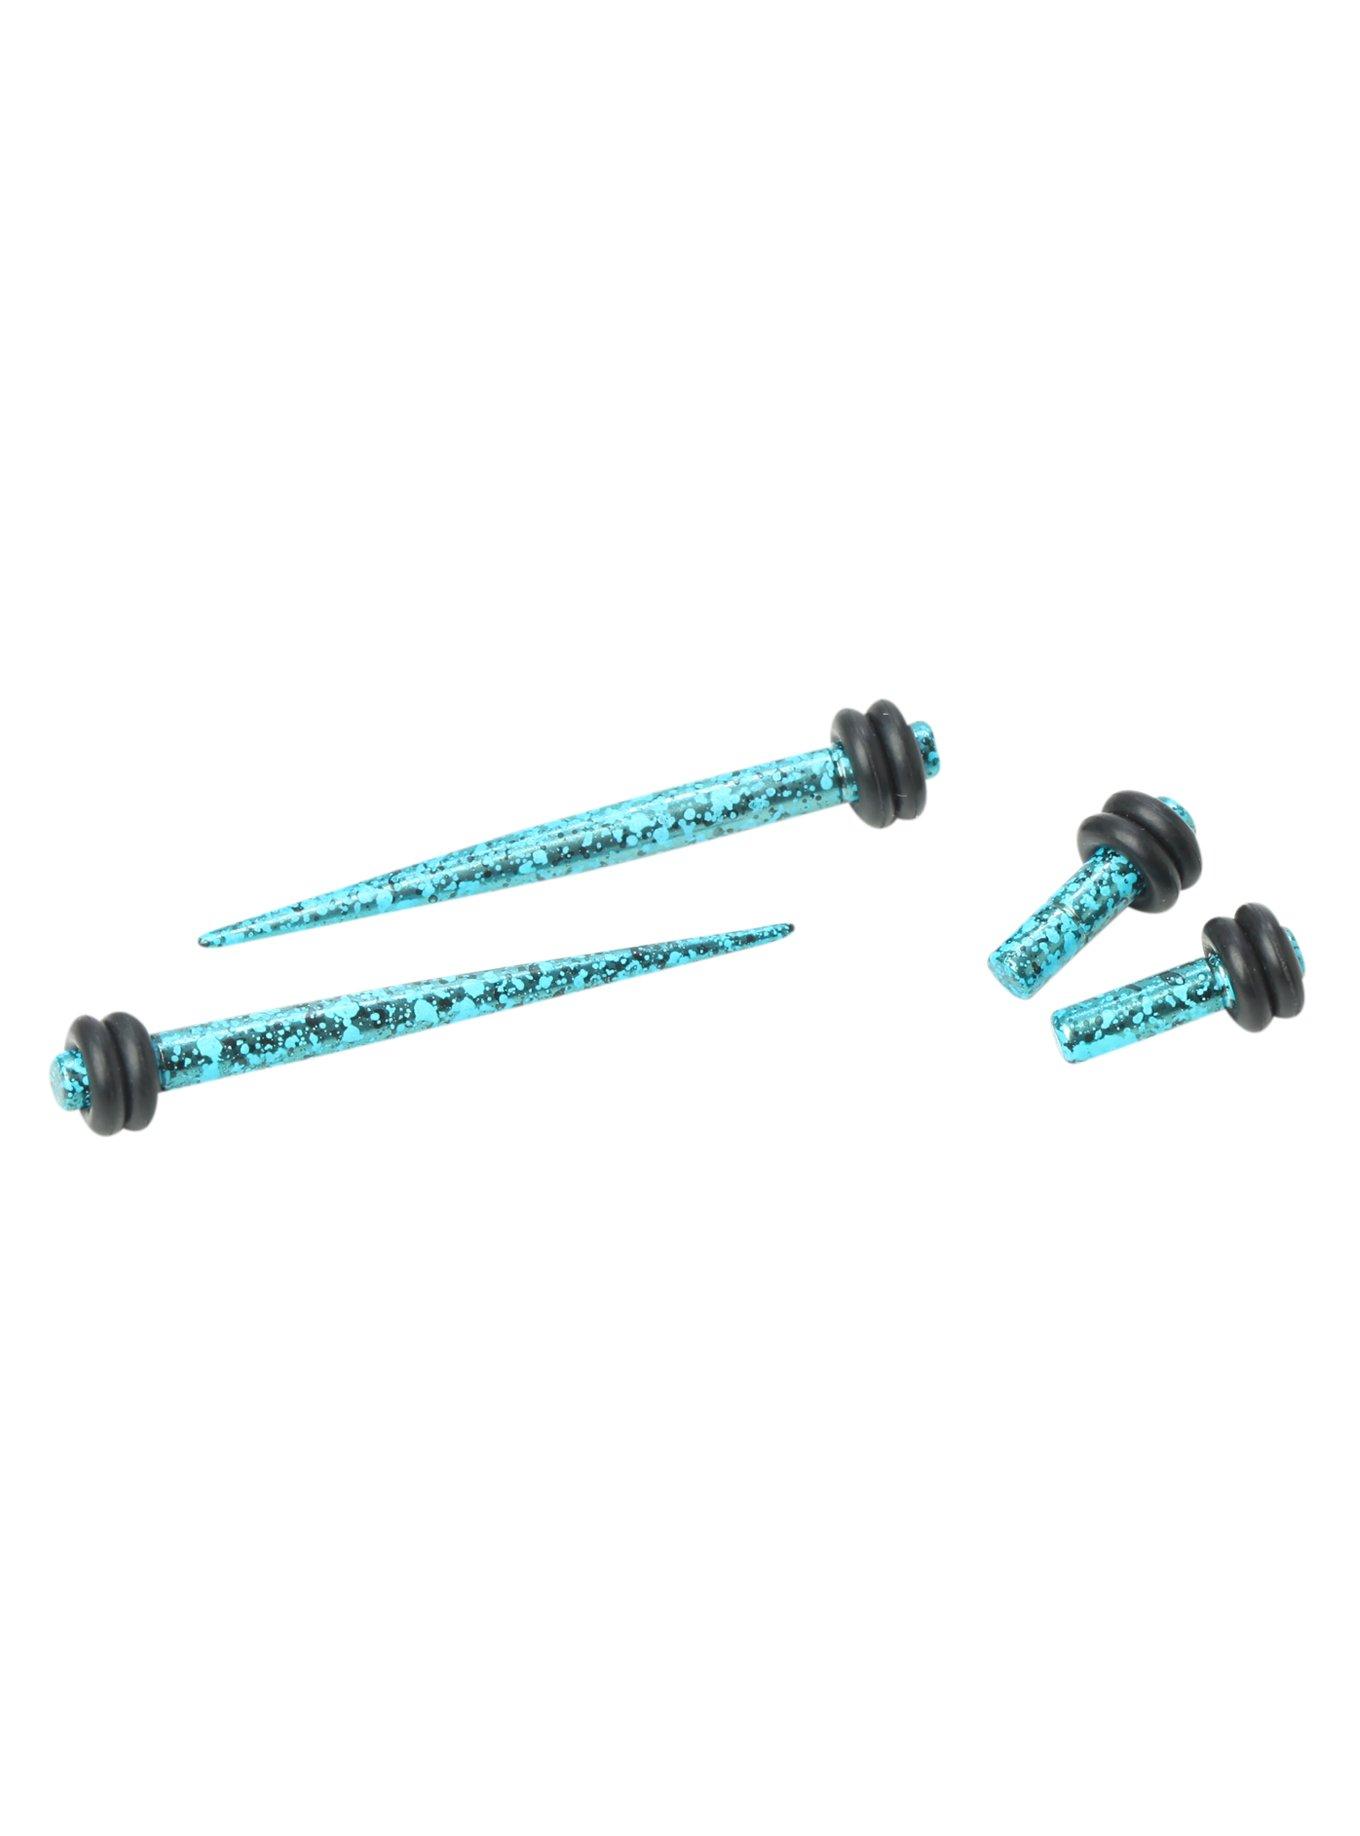 Acrylic Neon Blue Splatter Micro Taper And Plug 4 Pack, LIGHT BLUE, hi-res